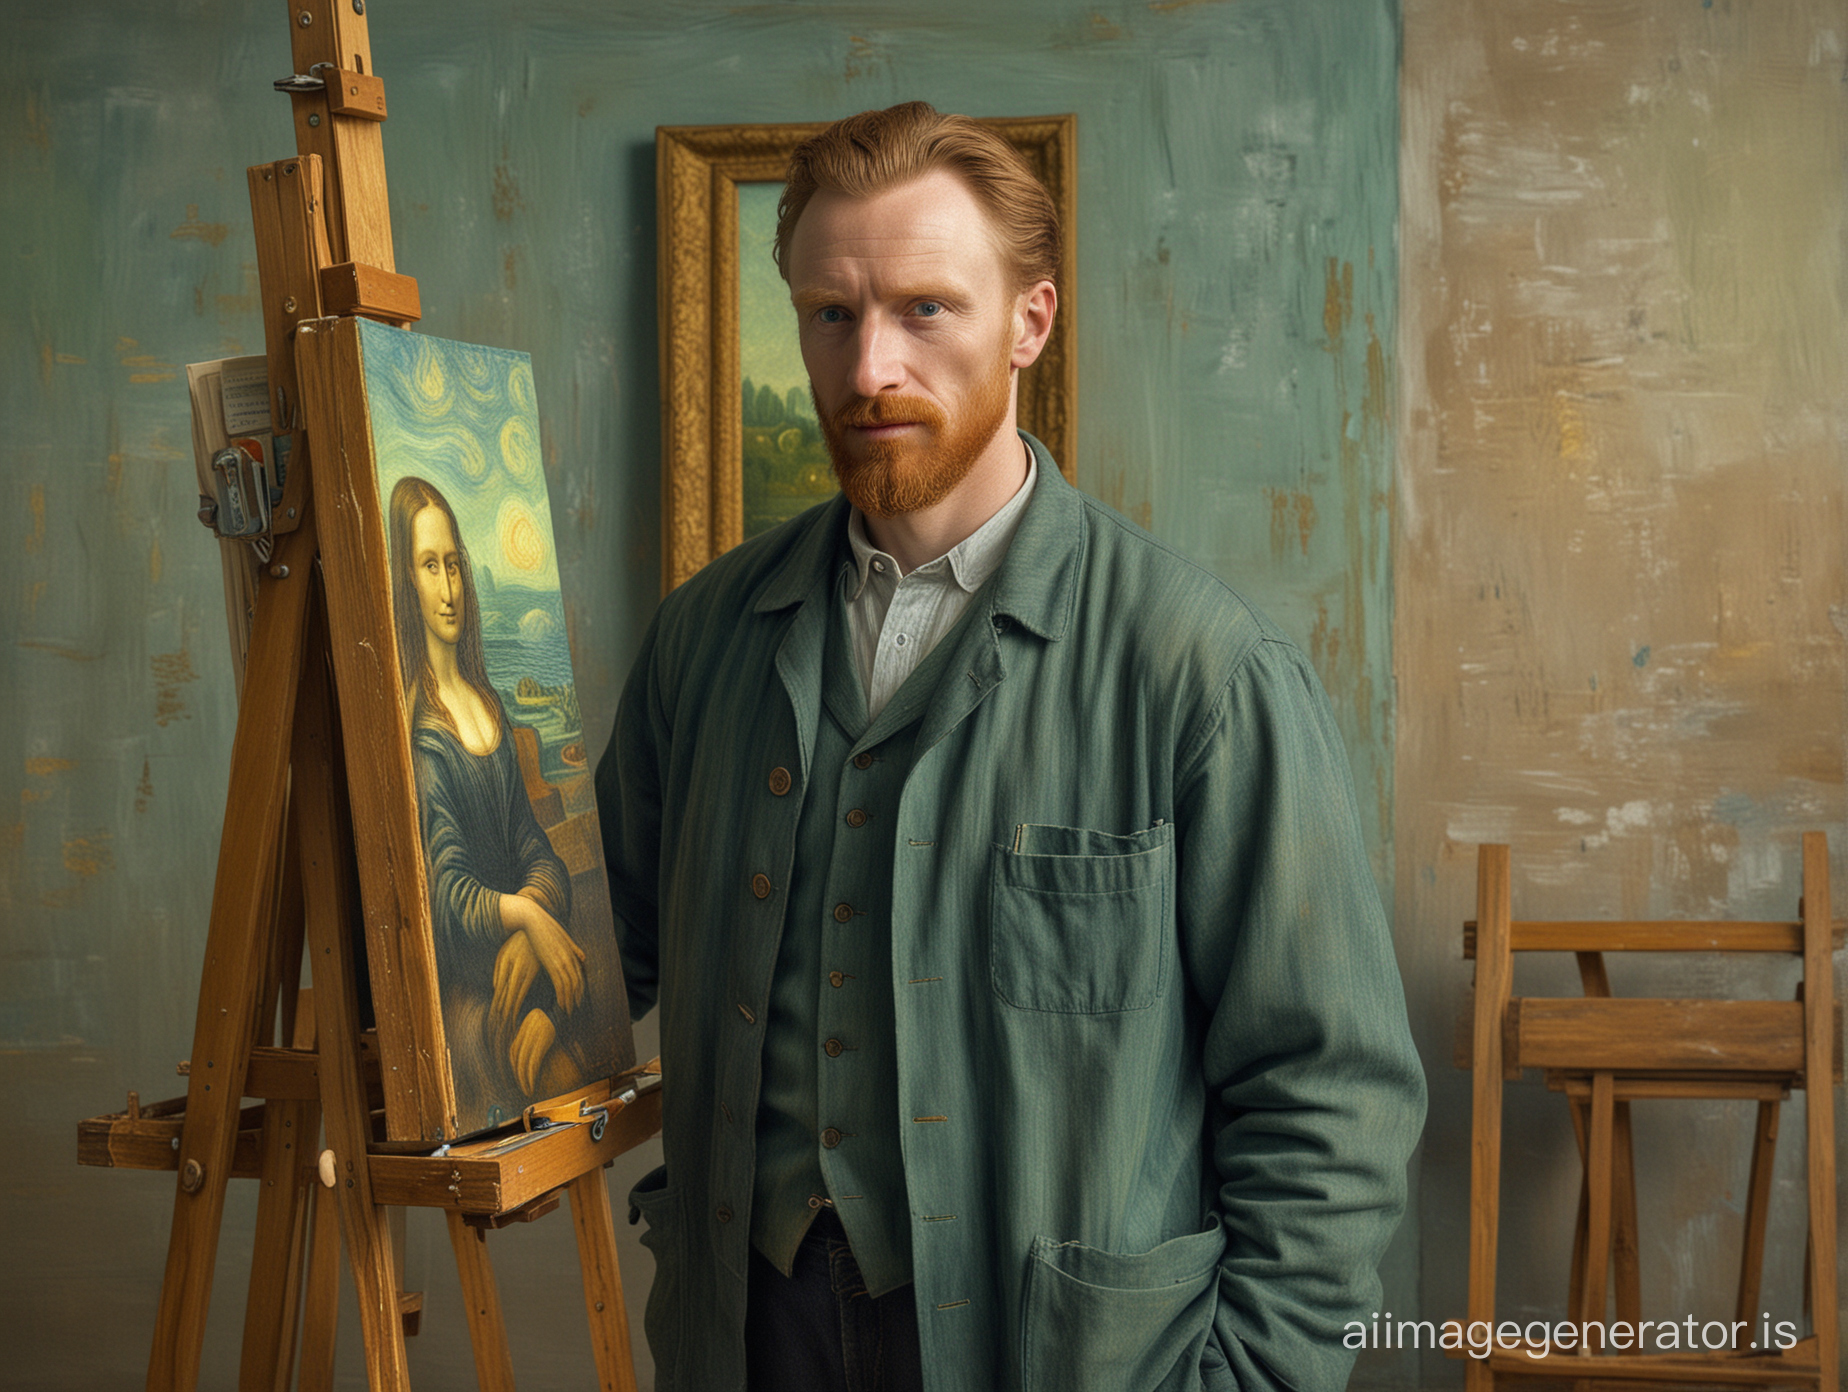 Imagine the artist (man) Van Gogh standing at the easel, he paints on canvas a copy of the portrait of the famous Mona Lisa. The background features swirling, dreamy colors and shapes reminiscent of van Gogh's stellar works. The atmosphere of this scene unites history and art, capturing the essence of creativity and artistic genius, photorealism